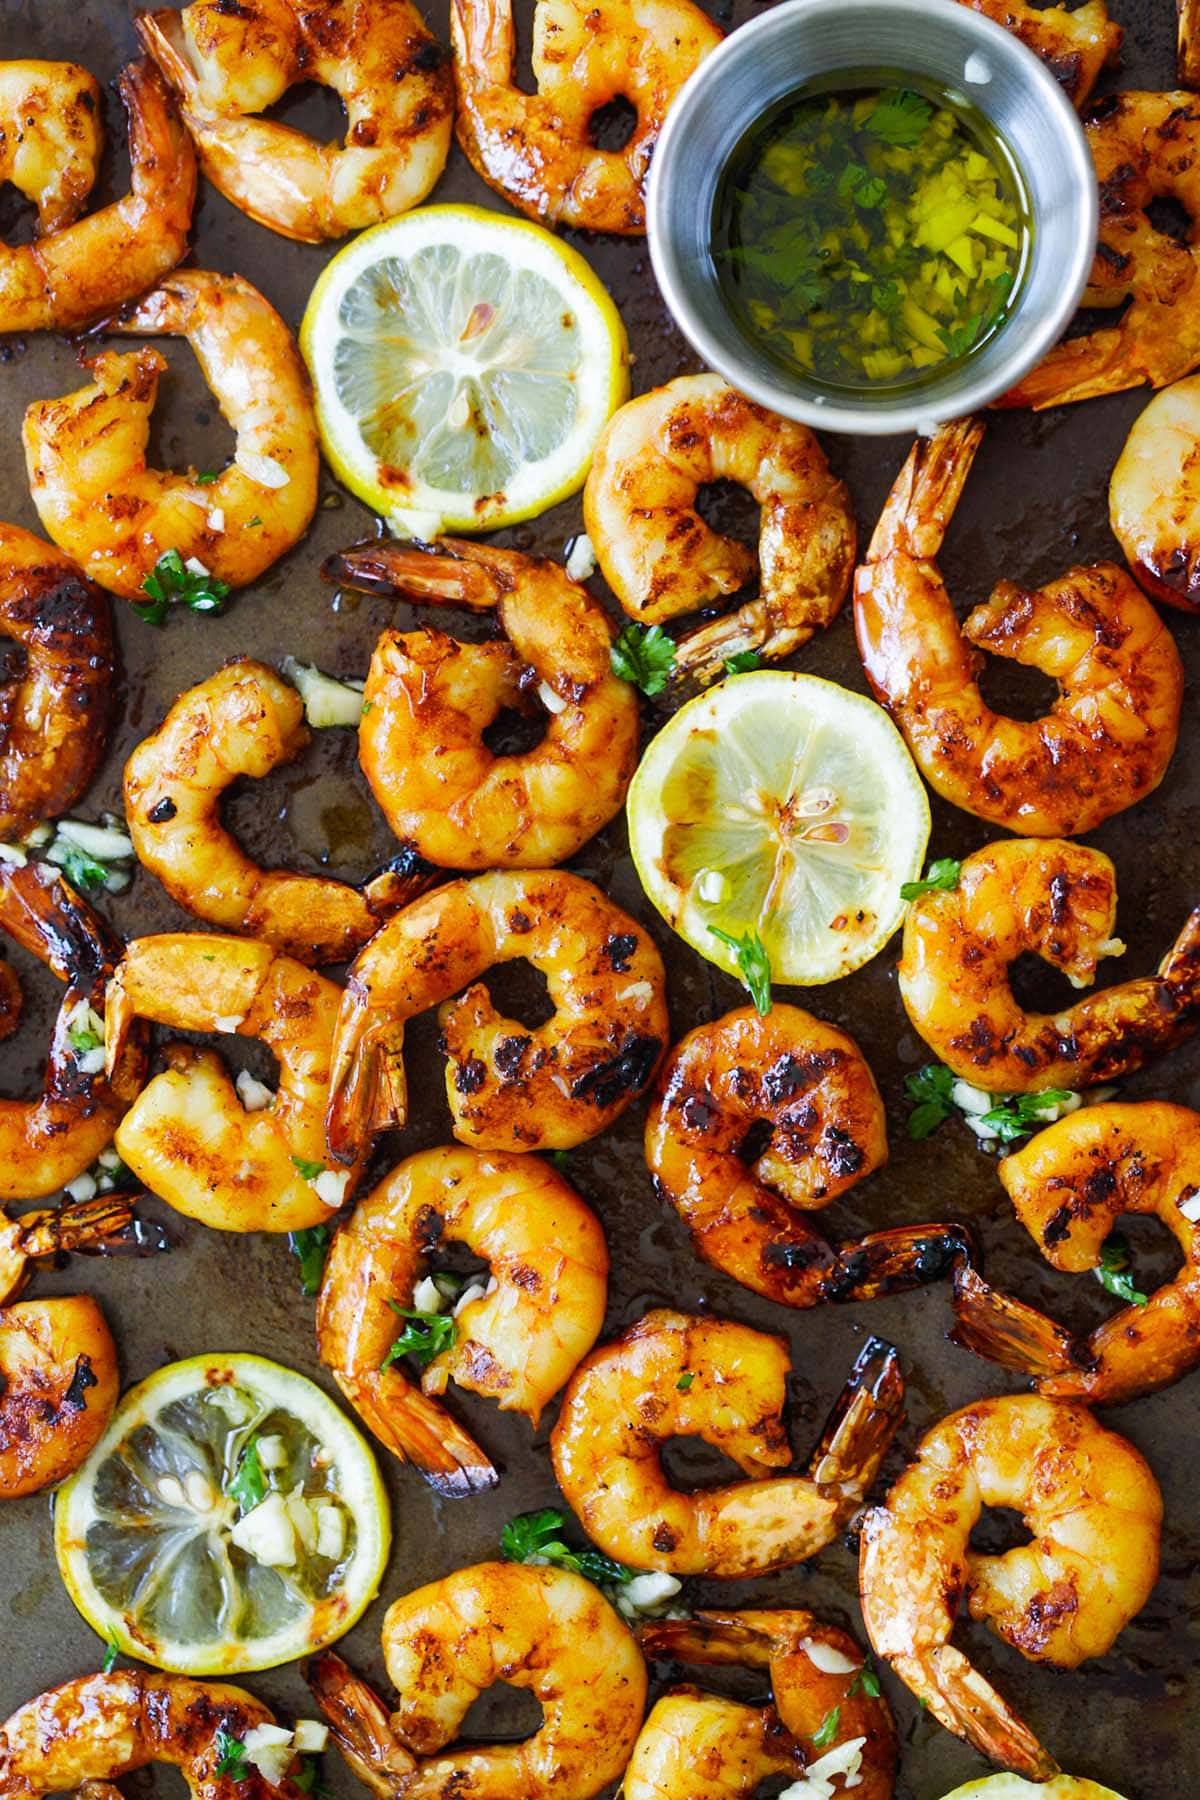 Top down view of grilled shrimp.